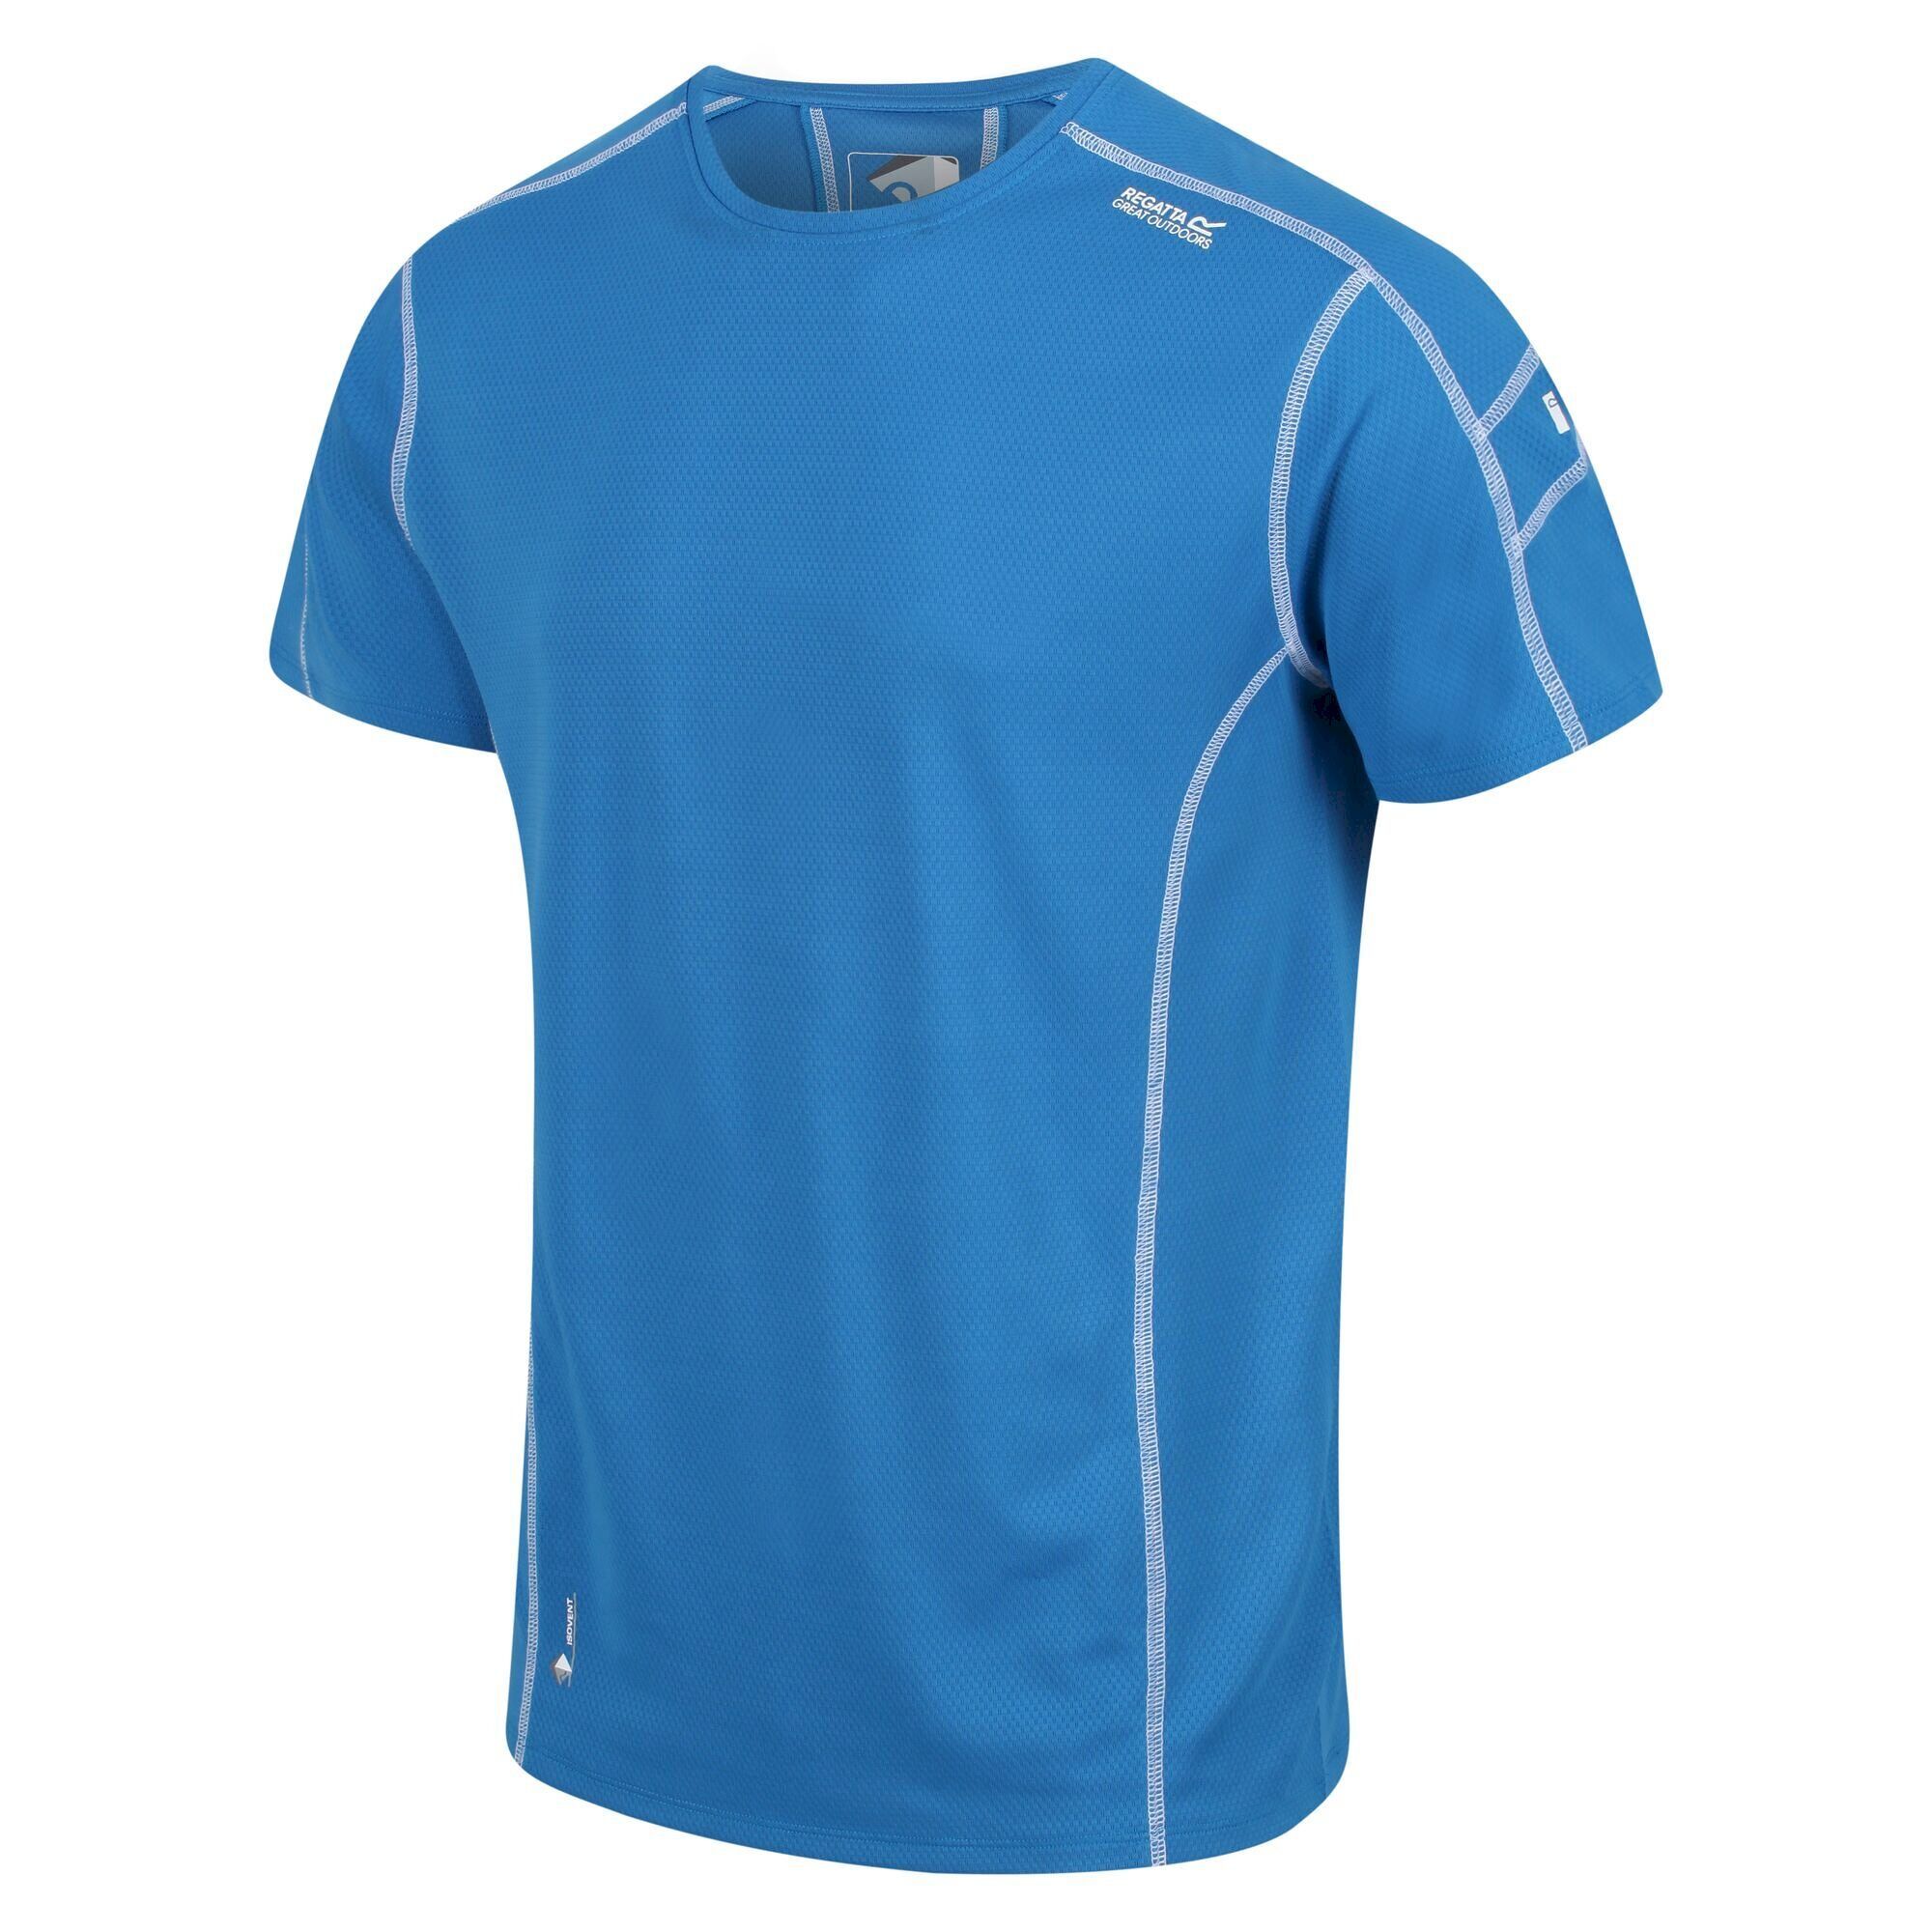 100% Polyester. Fabric: Isovent. Design: Logo. Neckline: Round Neck. Sleeve-Type: Short-Sleeved. Fabric Technology: Breathable, Moisture Wicking, Quick Dry. Hardwearing.